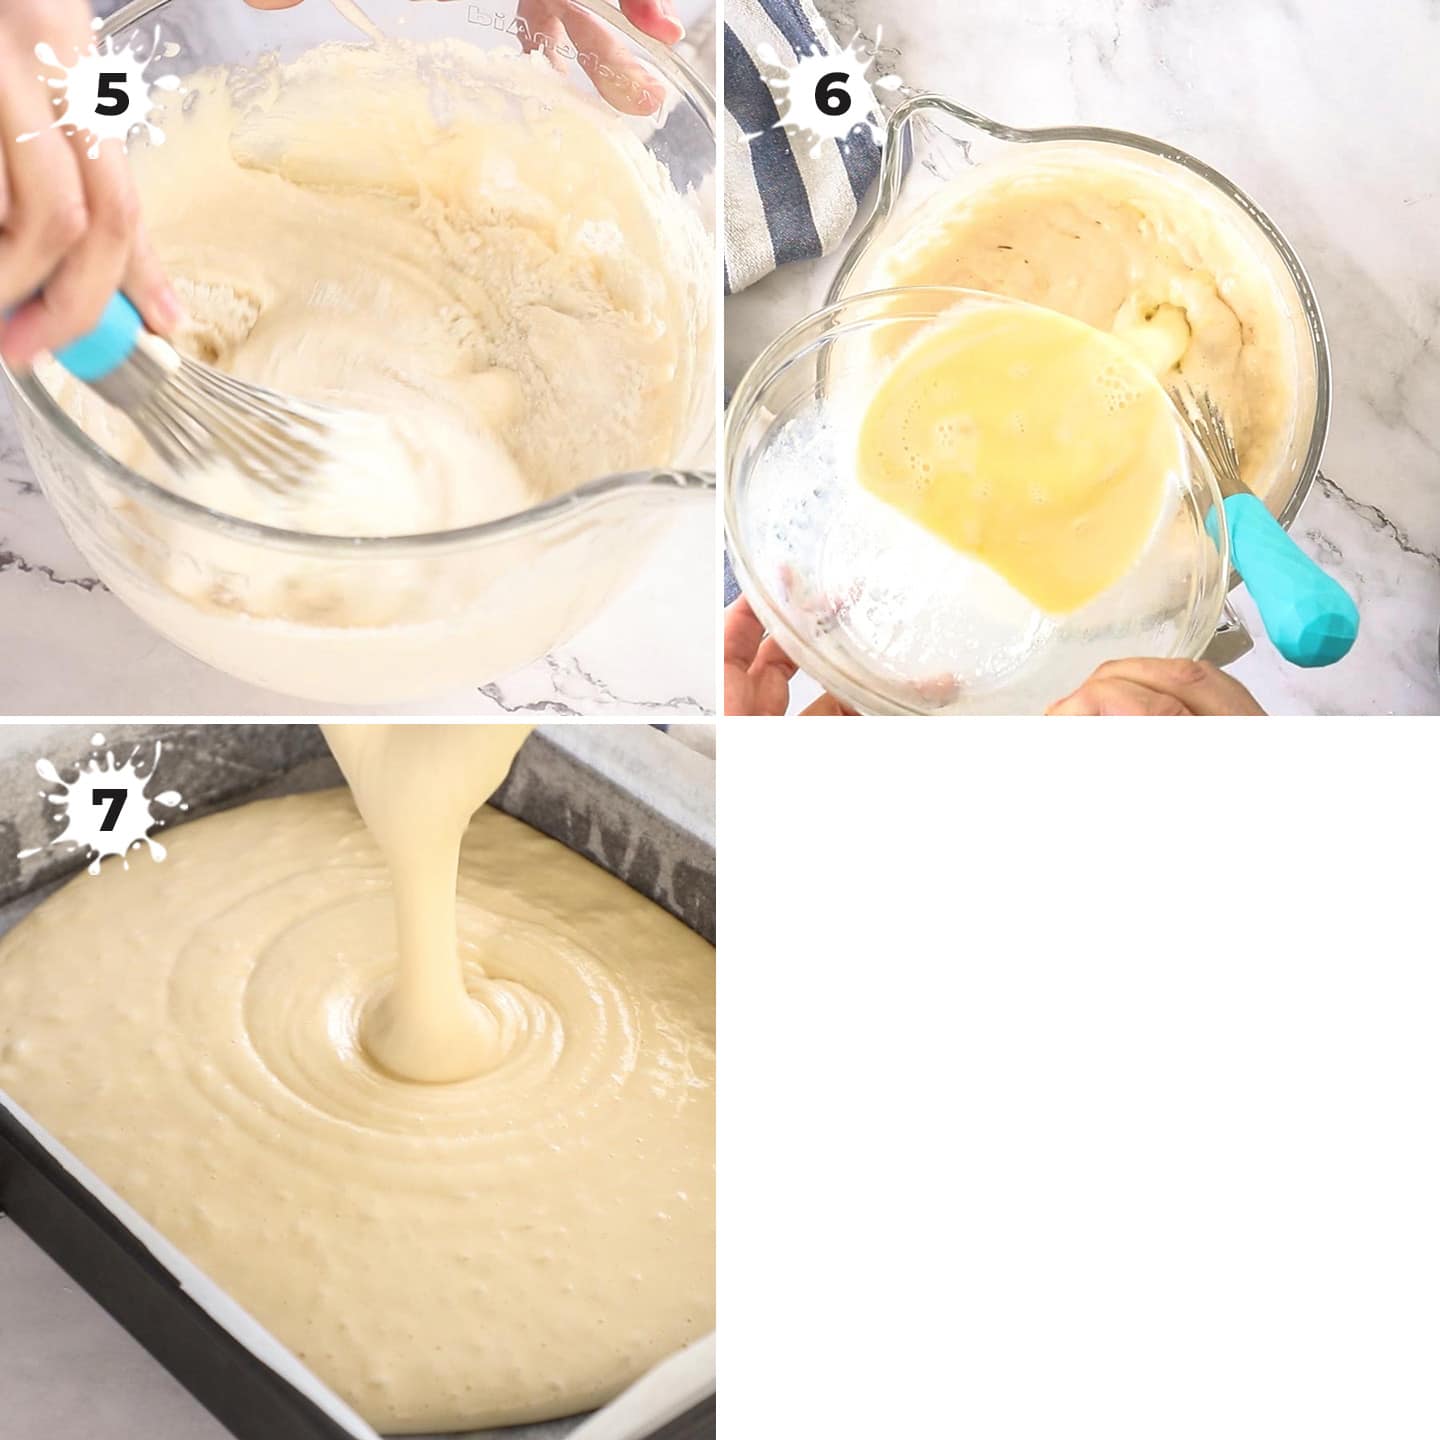 Cake batter being mixed in a glass bowl and poured into a cake tin.